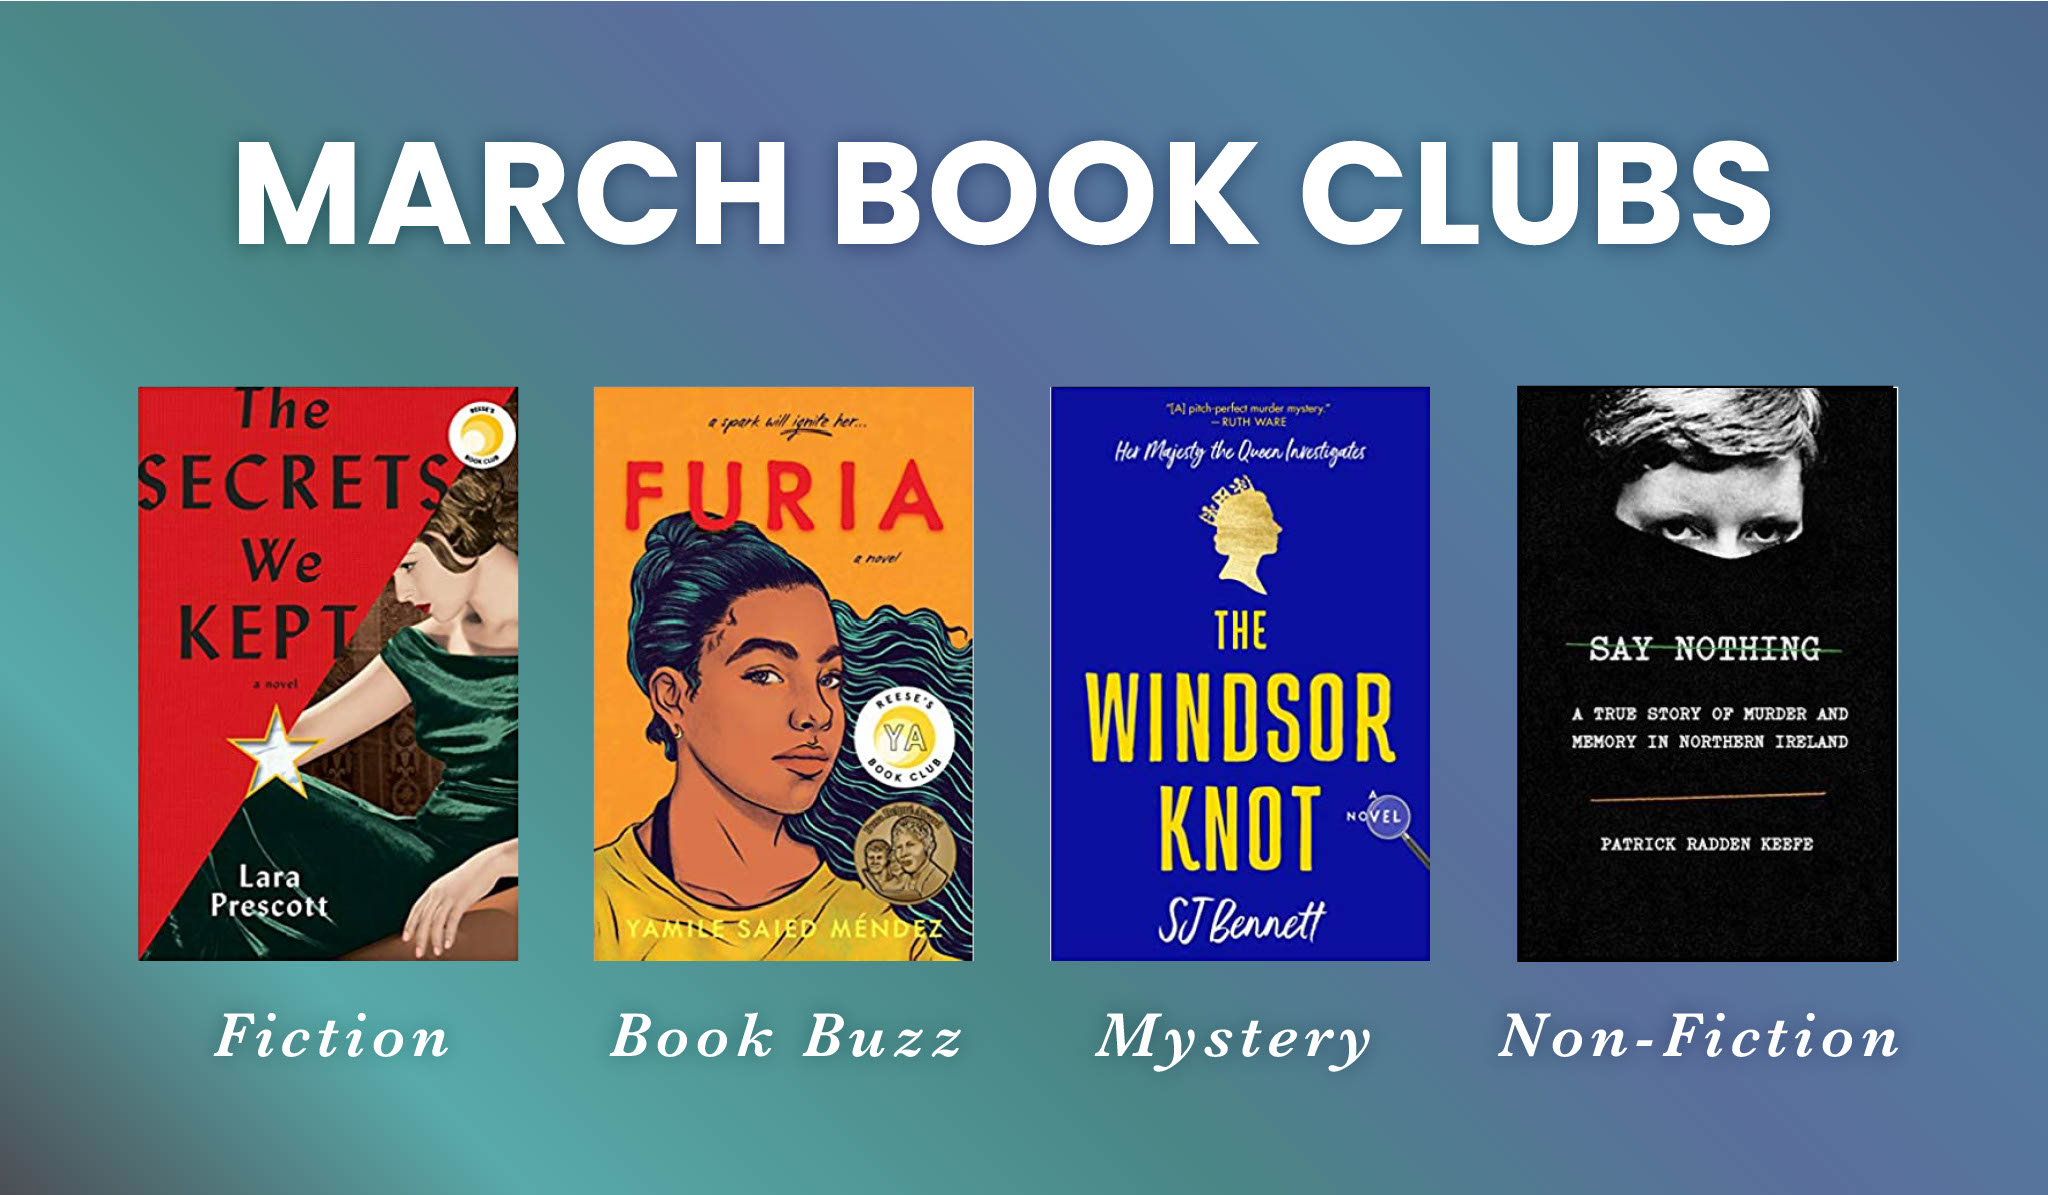 Covers of all 4 March book club books